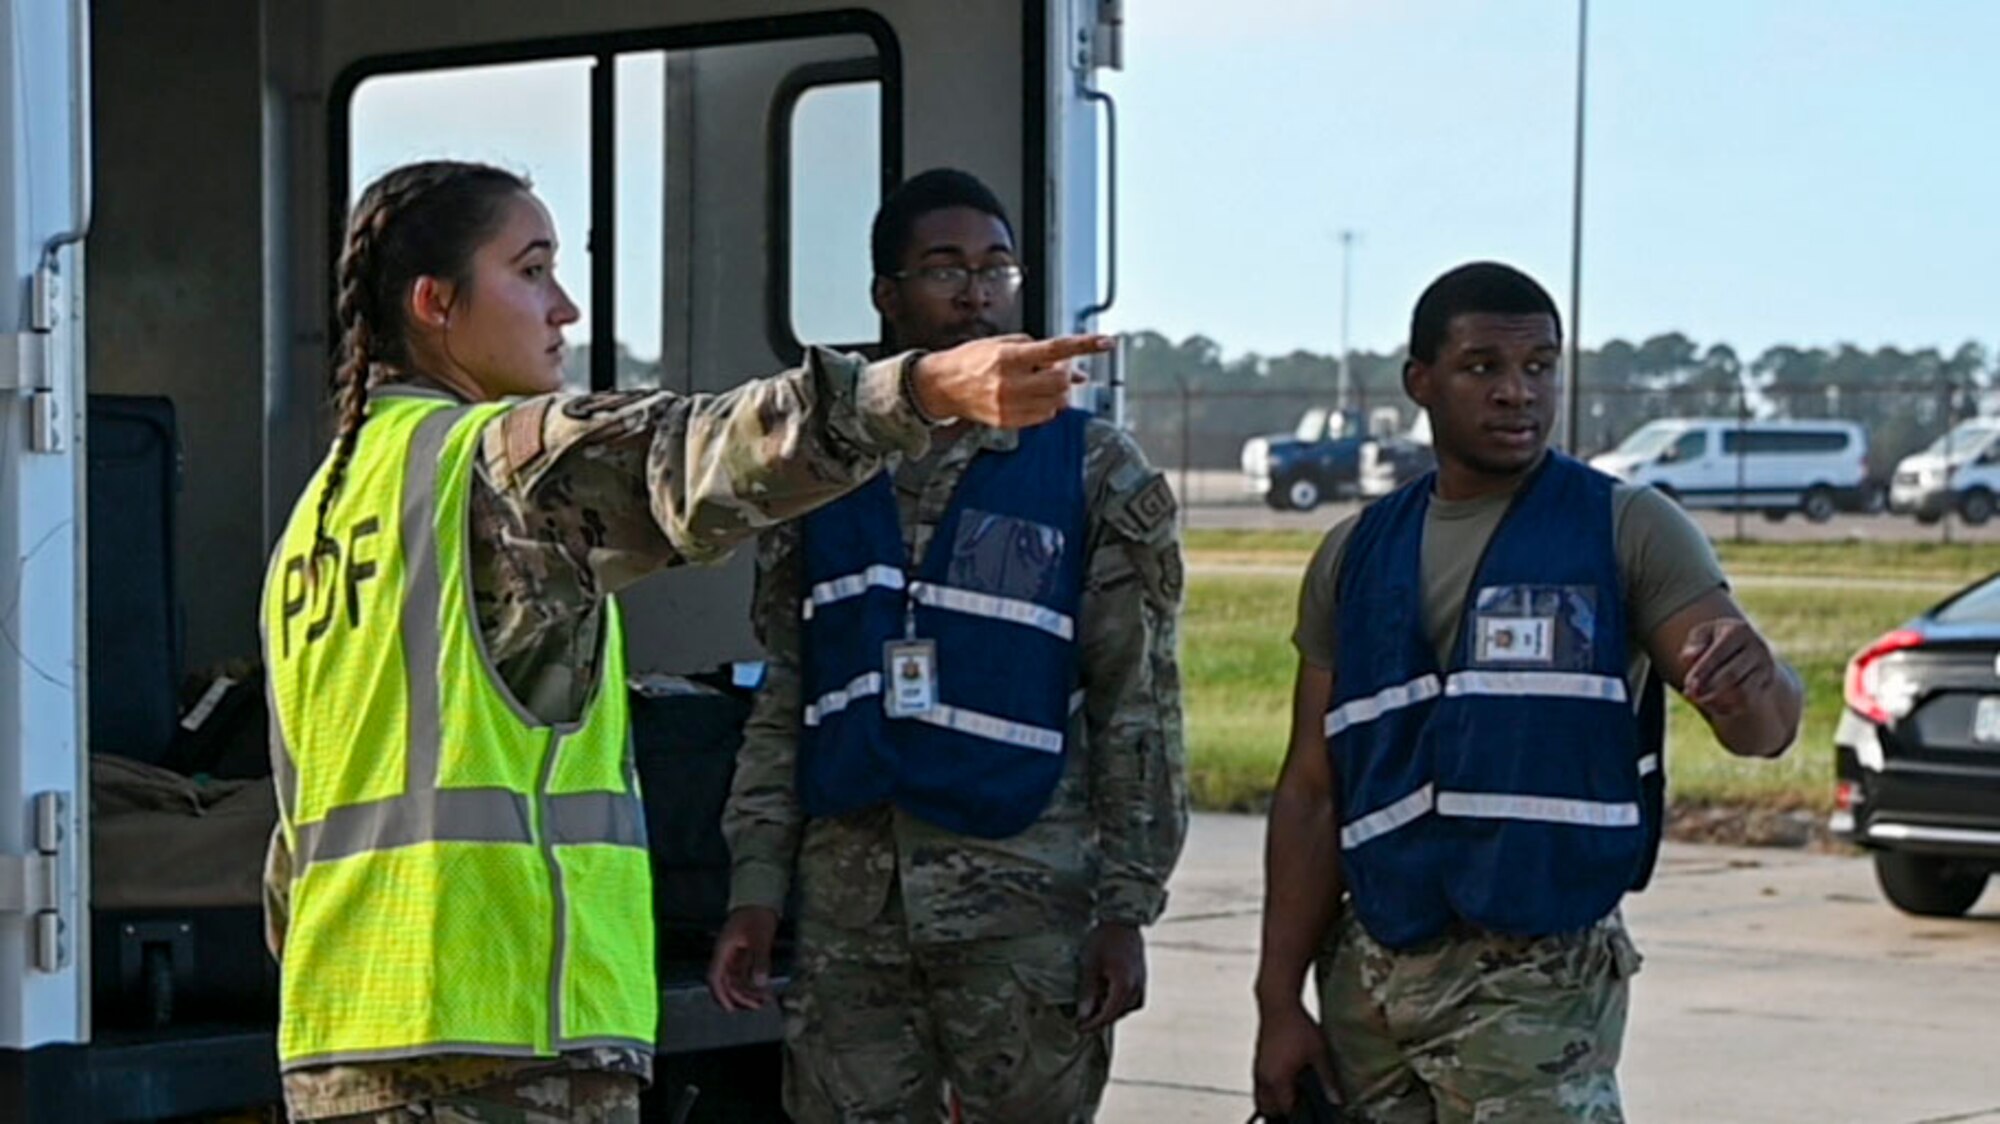 Airmen with the 6th Air Refueling Wing, participate in a personnel deployment function line, at MacDill Air Force Base, Florida, Nov. 5. 2022. The PDF line ensures personnel are properly equipped with government travel cards, valid identification, dog tags, records of emergency data and other necessary deployment documentation. (U.S. Air Force photo by Airman 1st Class Sterling Sutton)